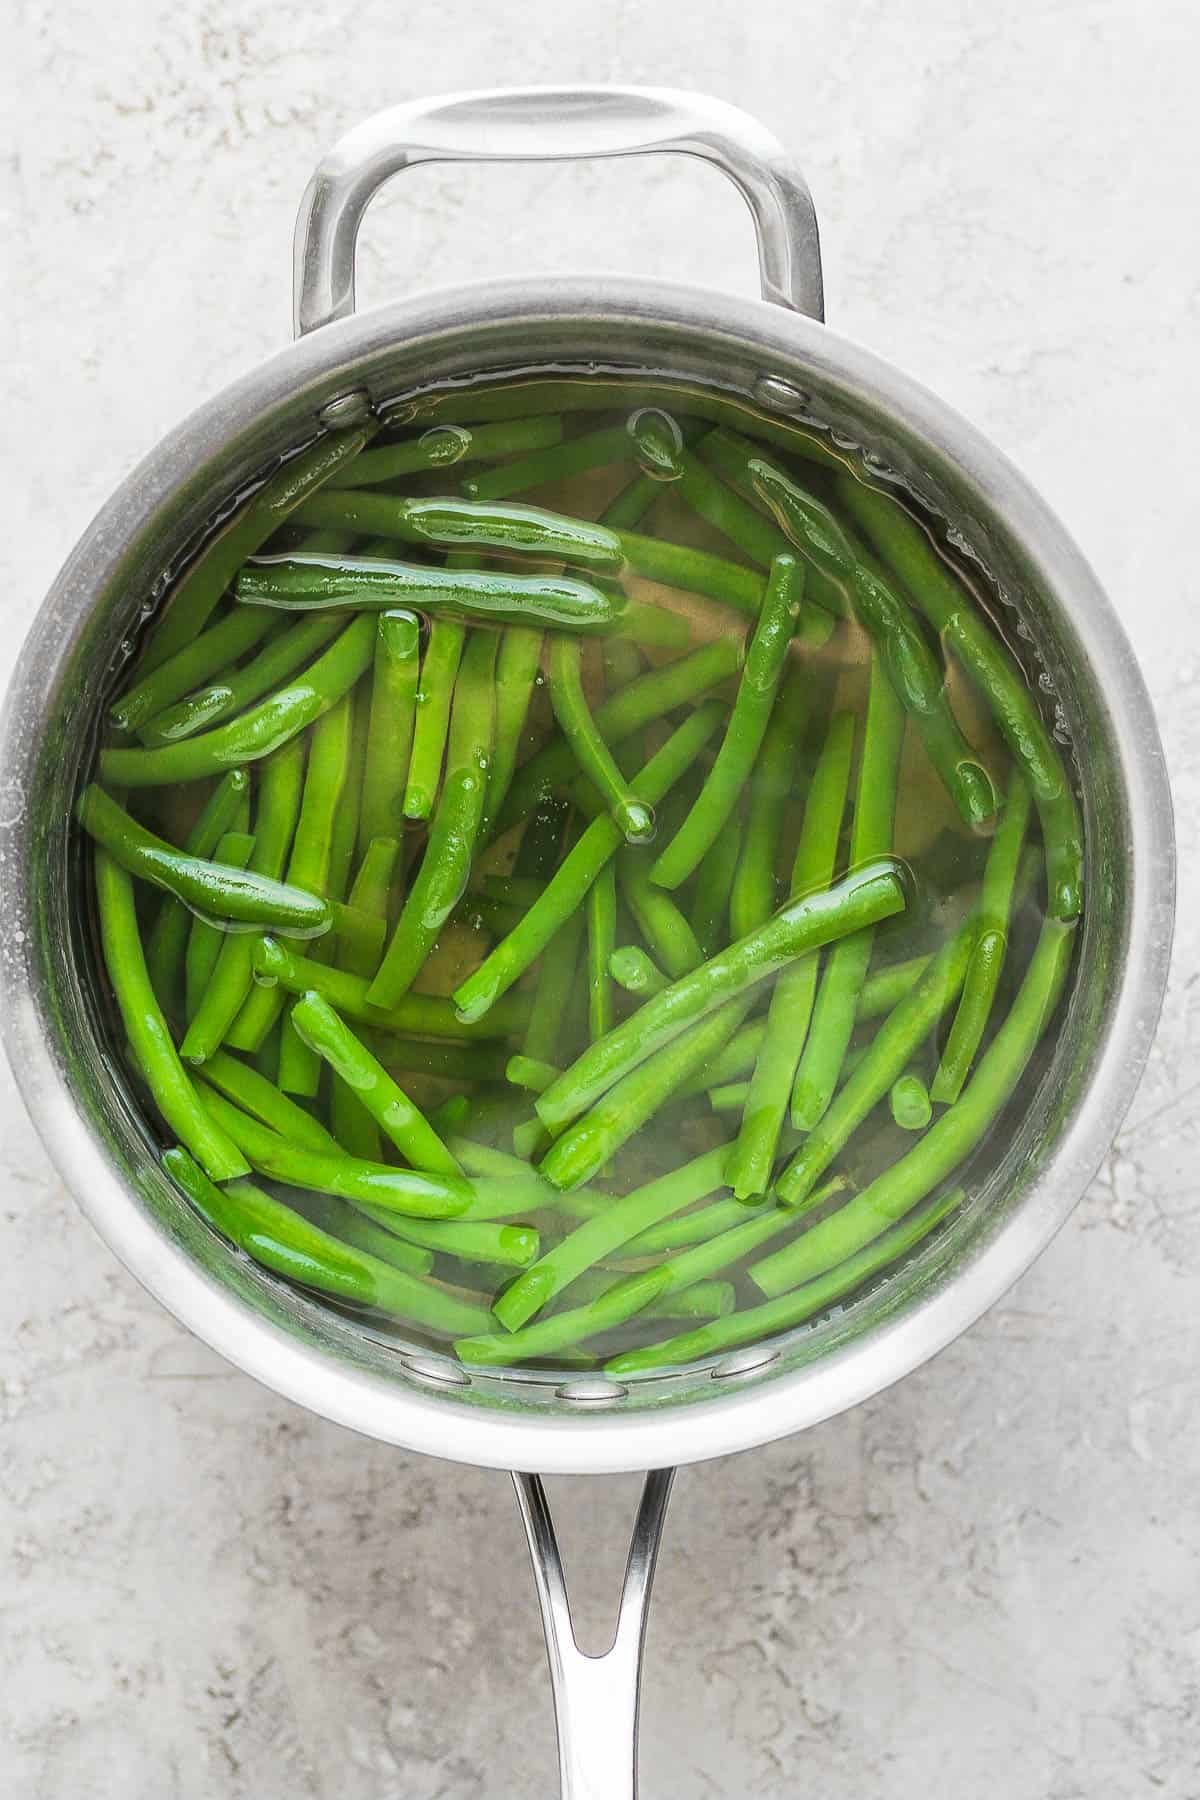 Green beans submerged in boiling water in a sauce pan.